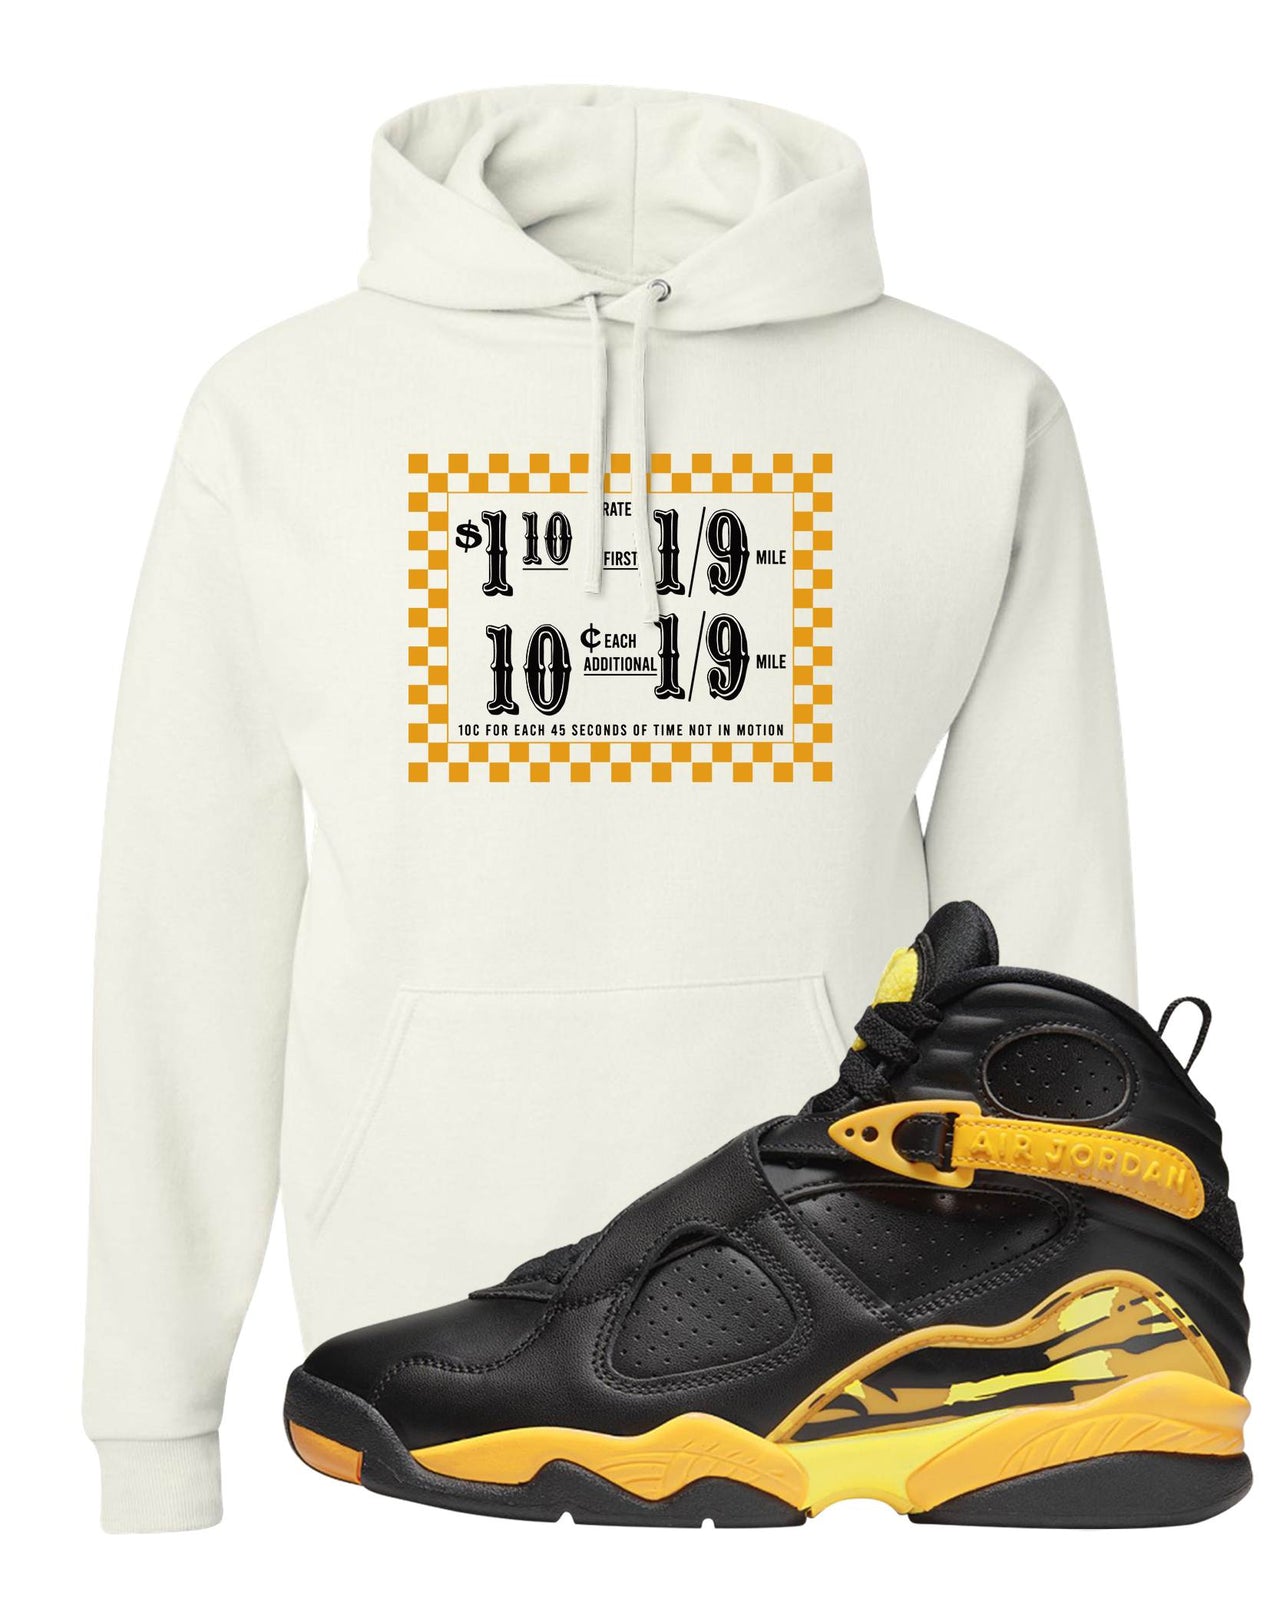 Taxi 8s Hoodie | Taxi Fare Ticket, White